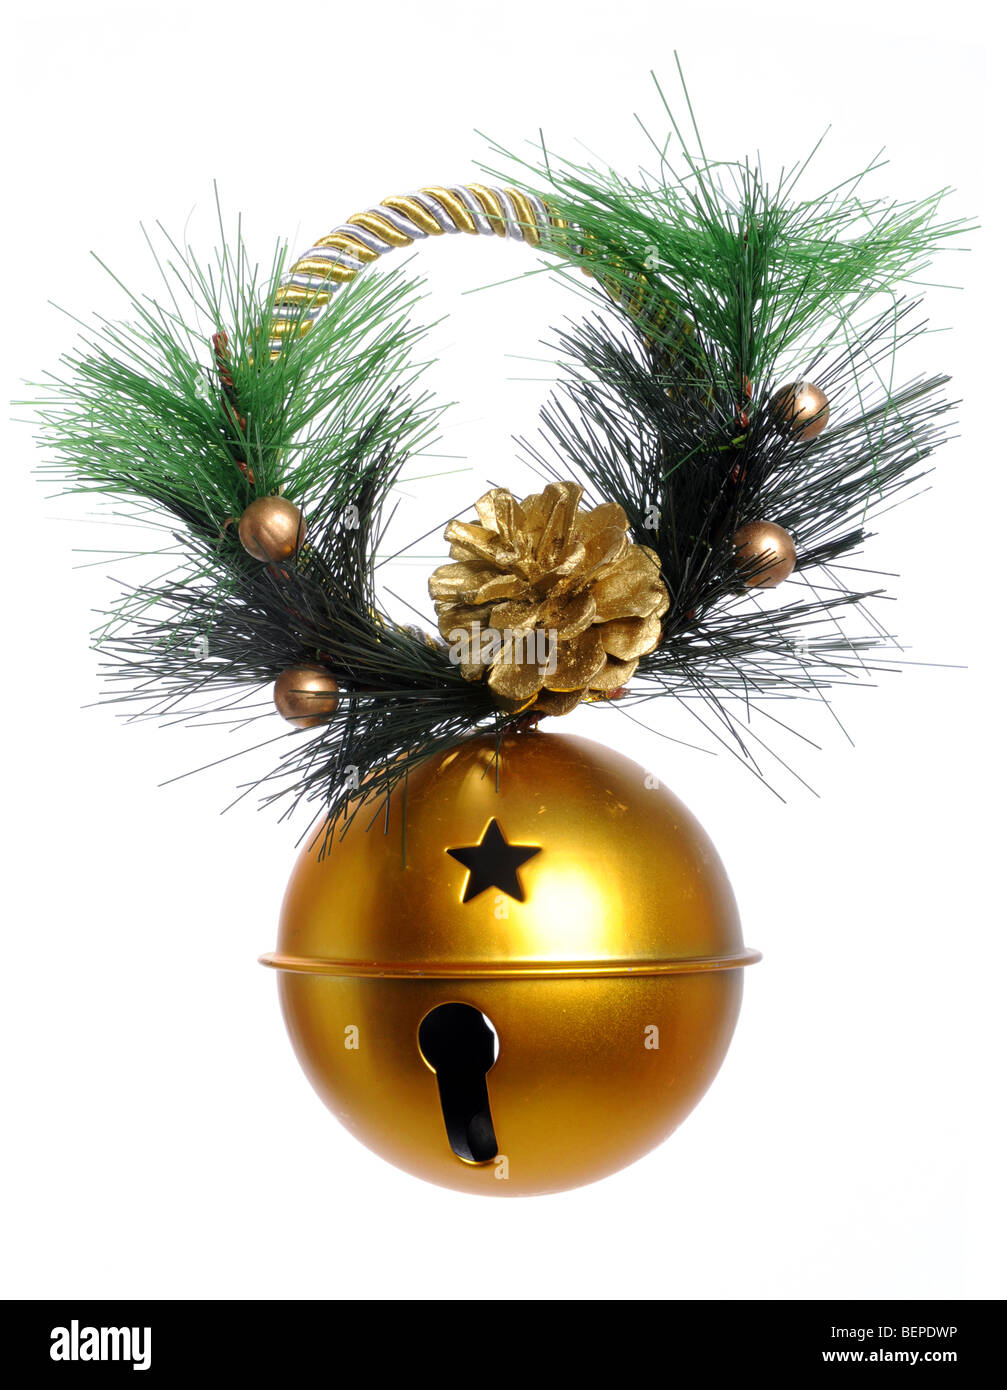 Cone pine, golden bells decorations, red and orange christmas tree ball on  white Stock Photo - Alamy